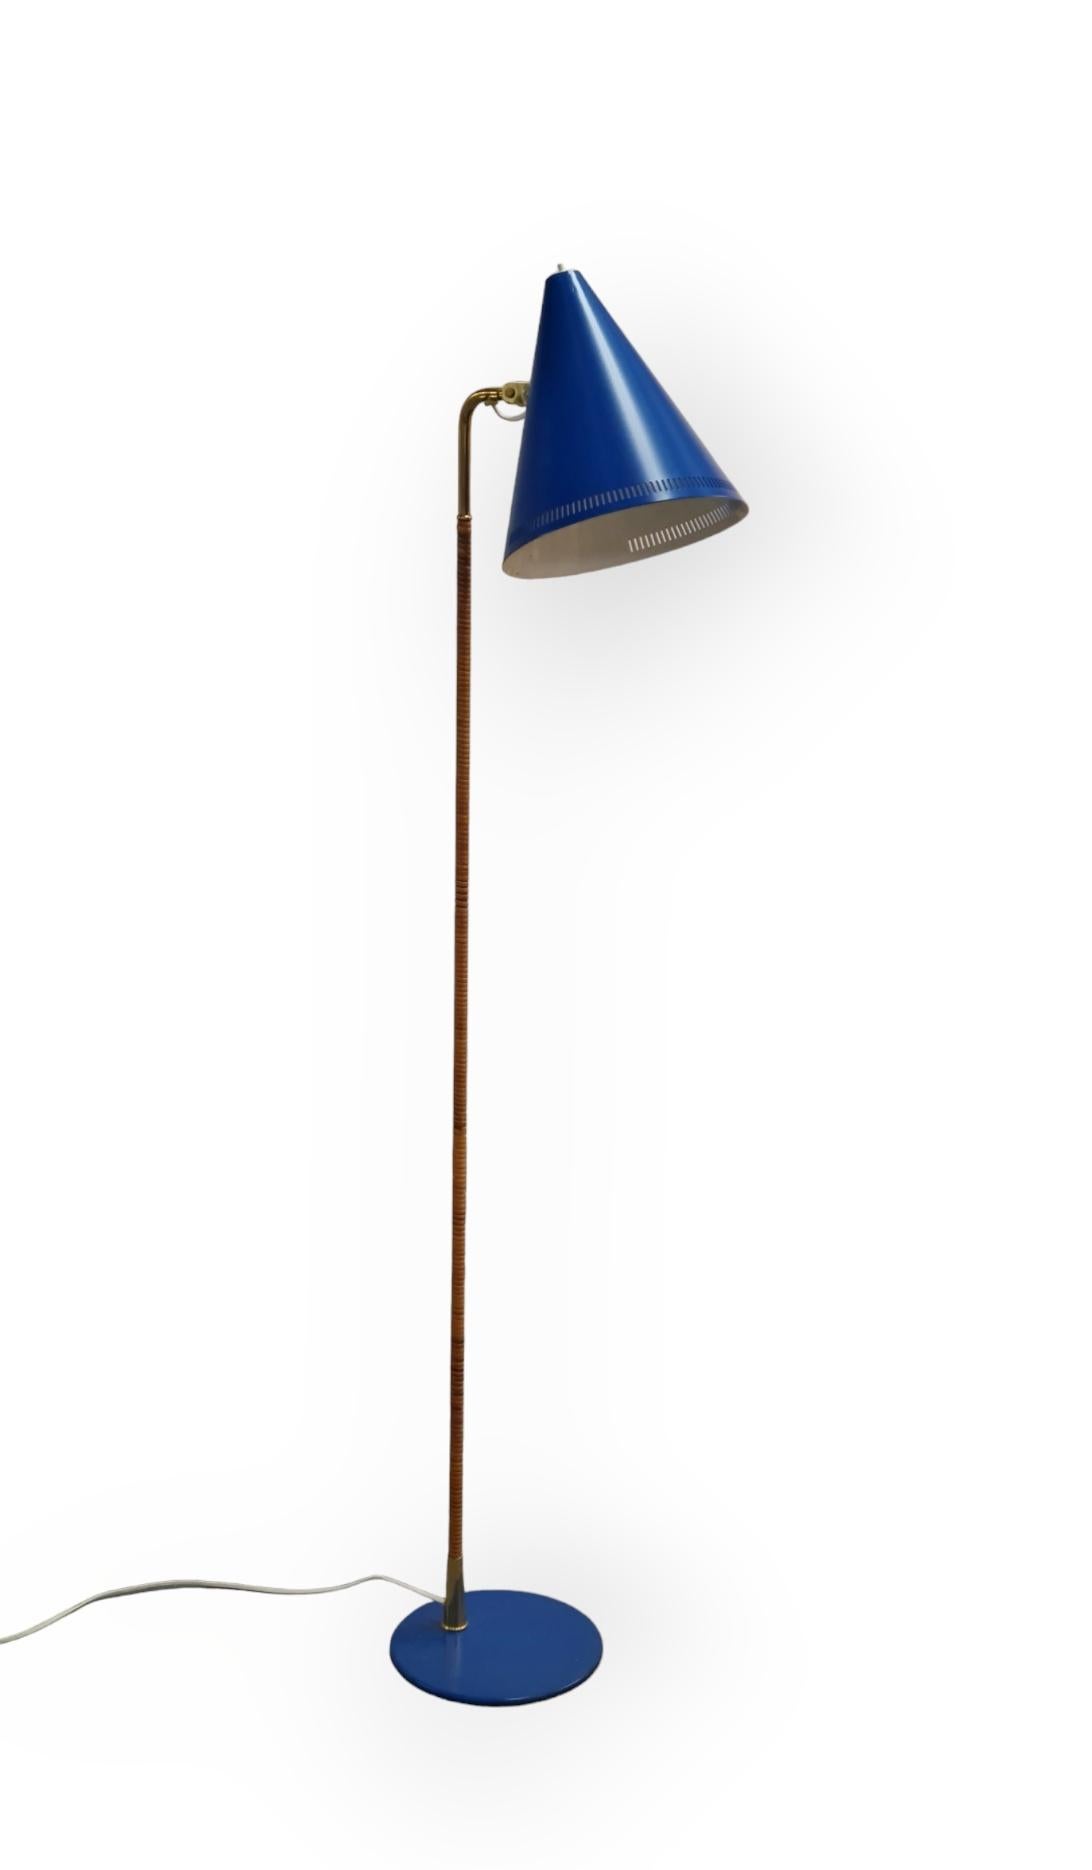 An iconic floor lamp model designed by Paavo Tynell for Idman in the 1950s. 

The lamp has been repainted in blue, as an alternative for the black and white versions that are the most frequent colors.

The lamp is otherwise in complete original